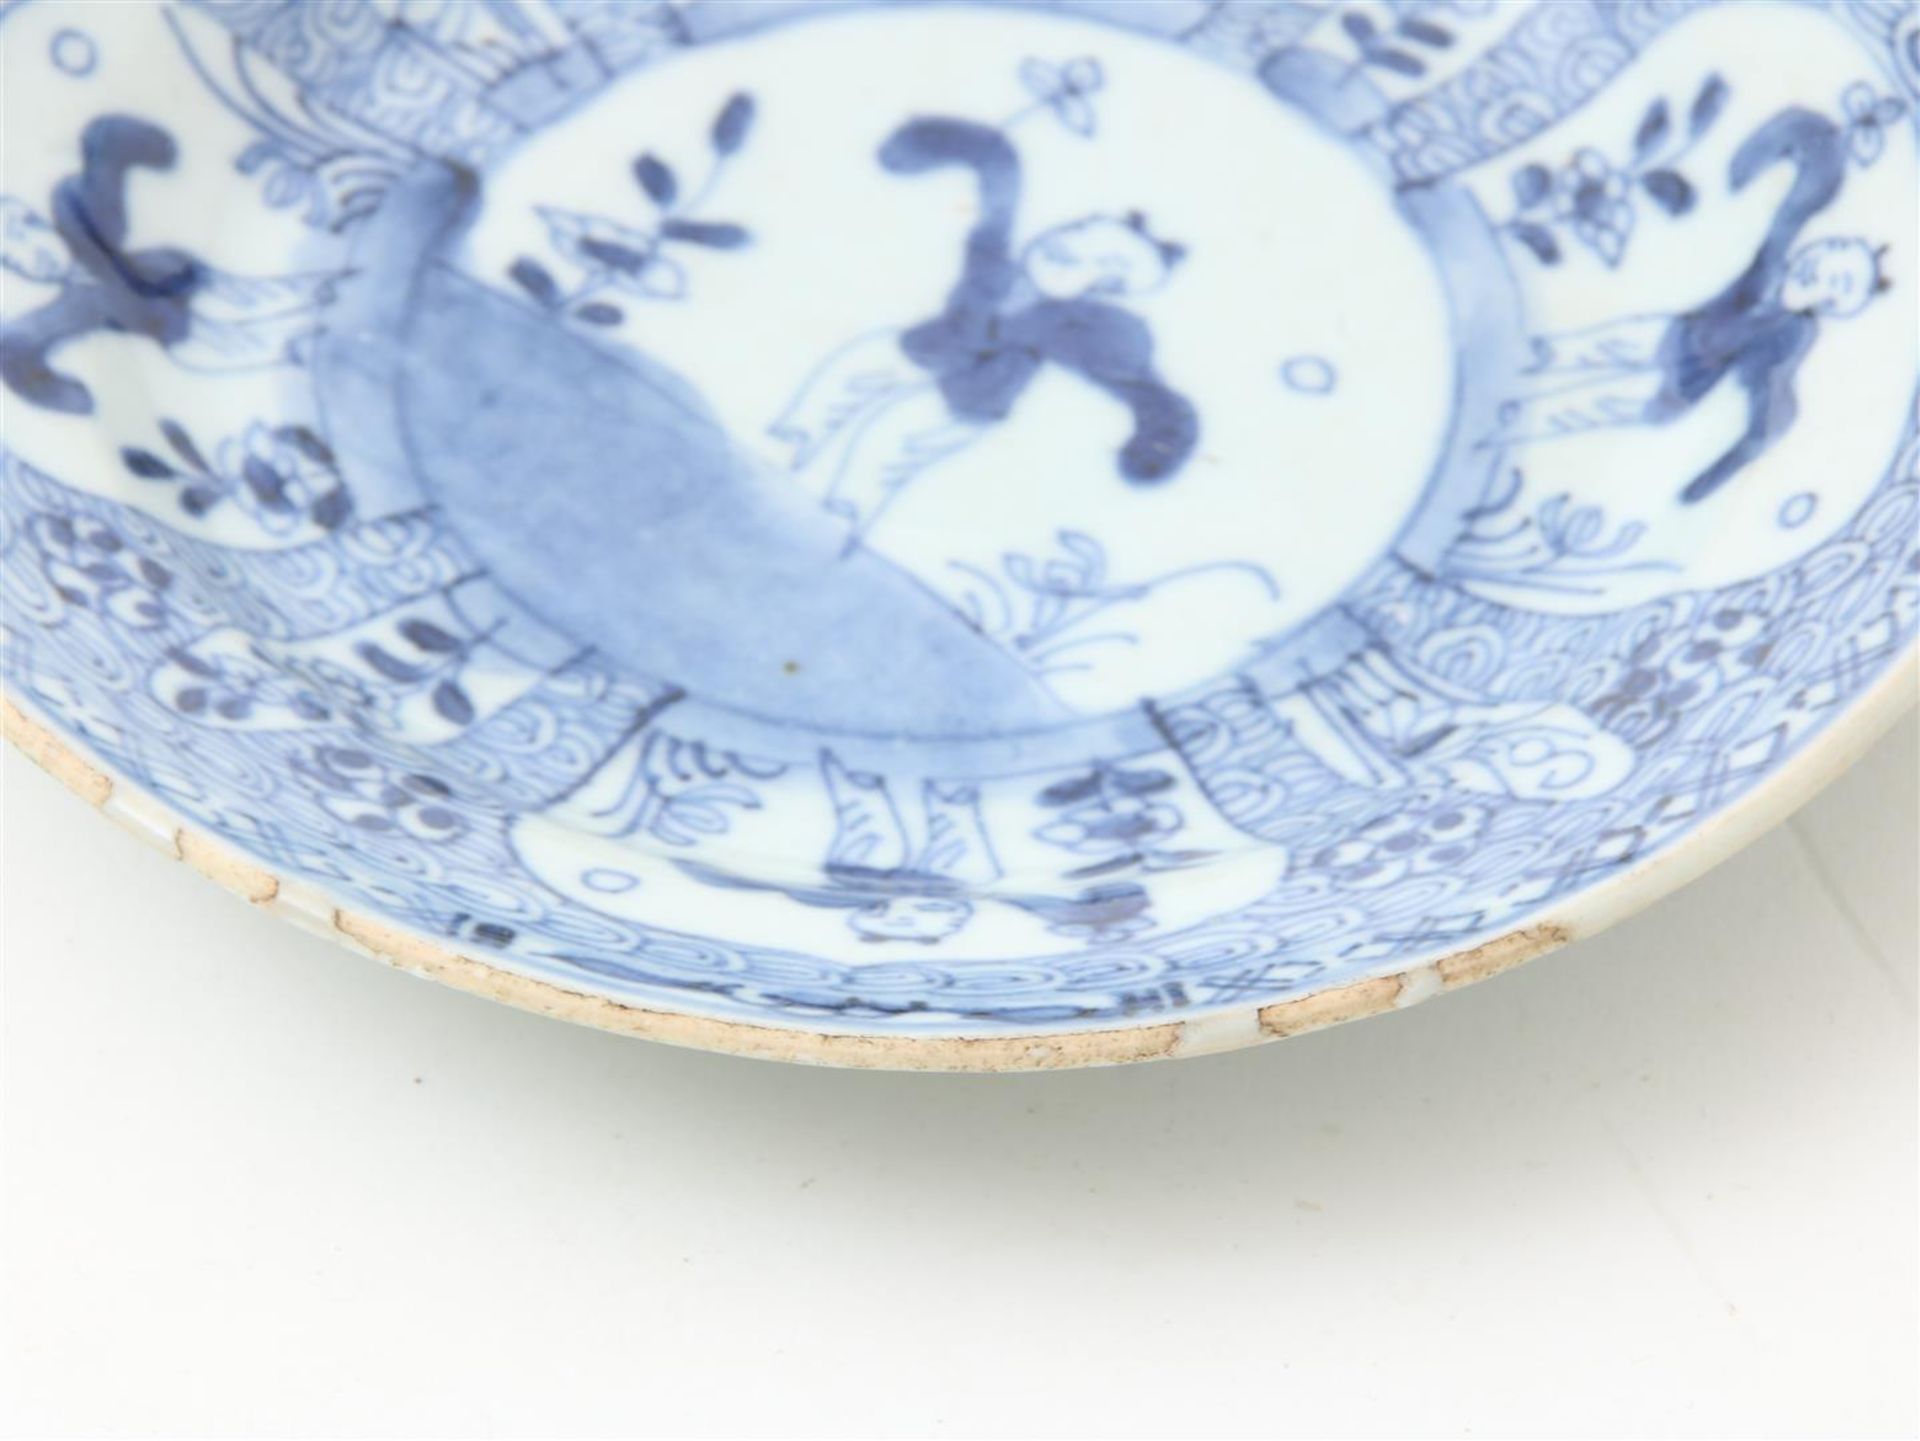 Series of 5 porcelain plates, China 19th century - Image 8 of 9